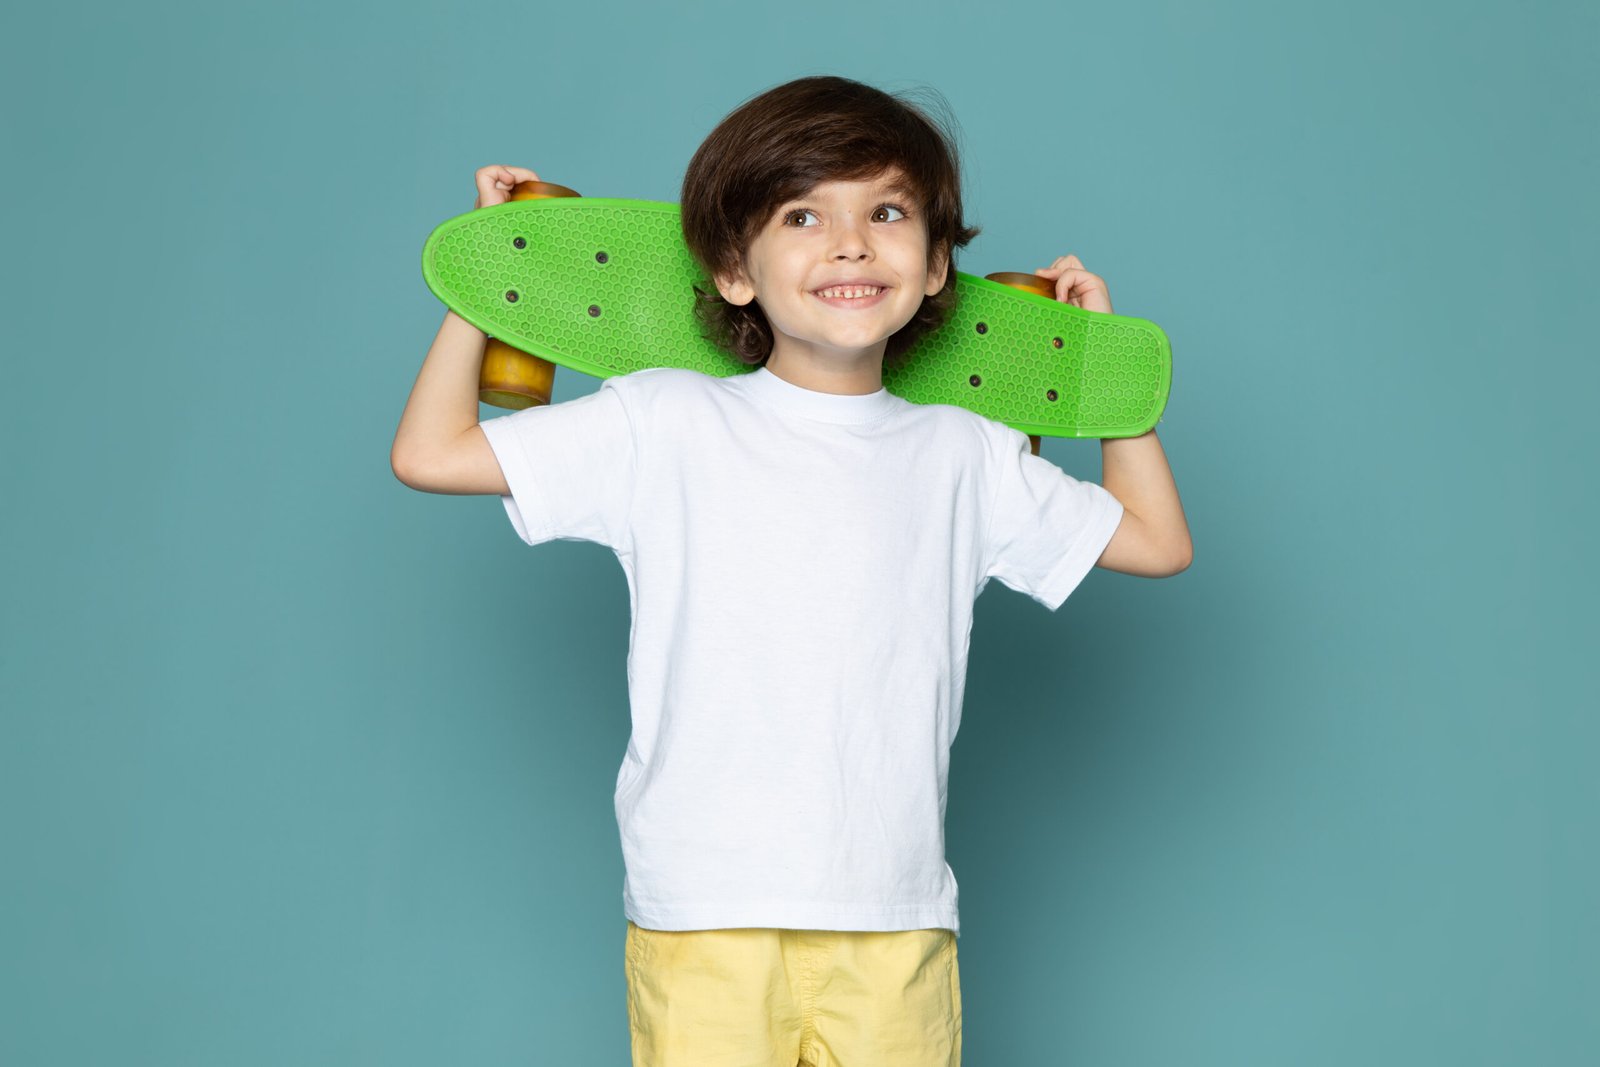 front-view-cute-boy-white-t-shirt-yellow-jeans-holding-green-skateboard-blue-space